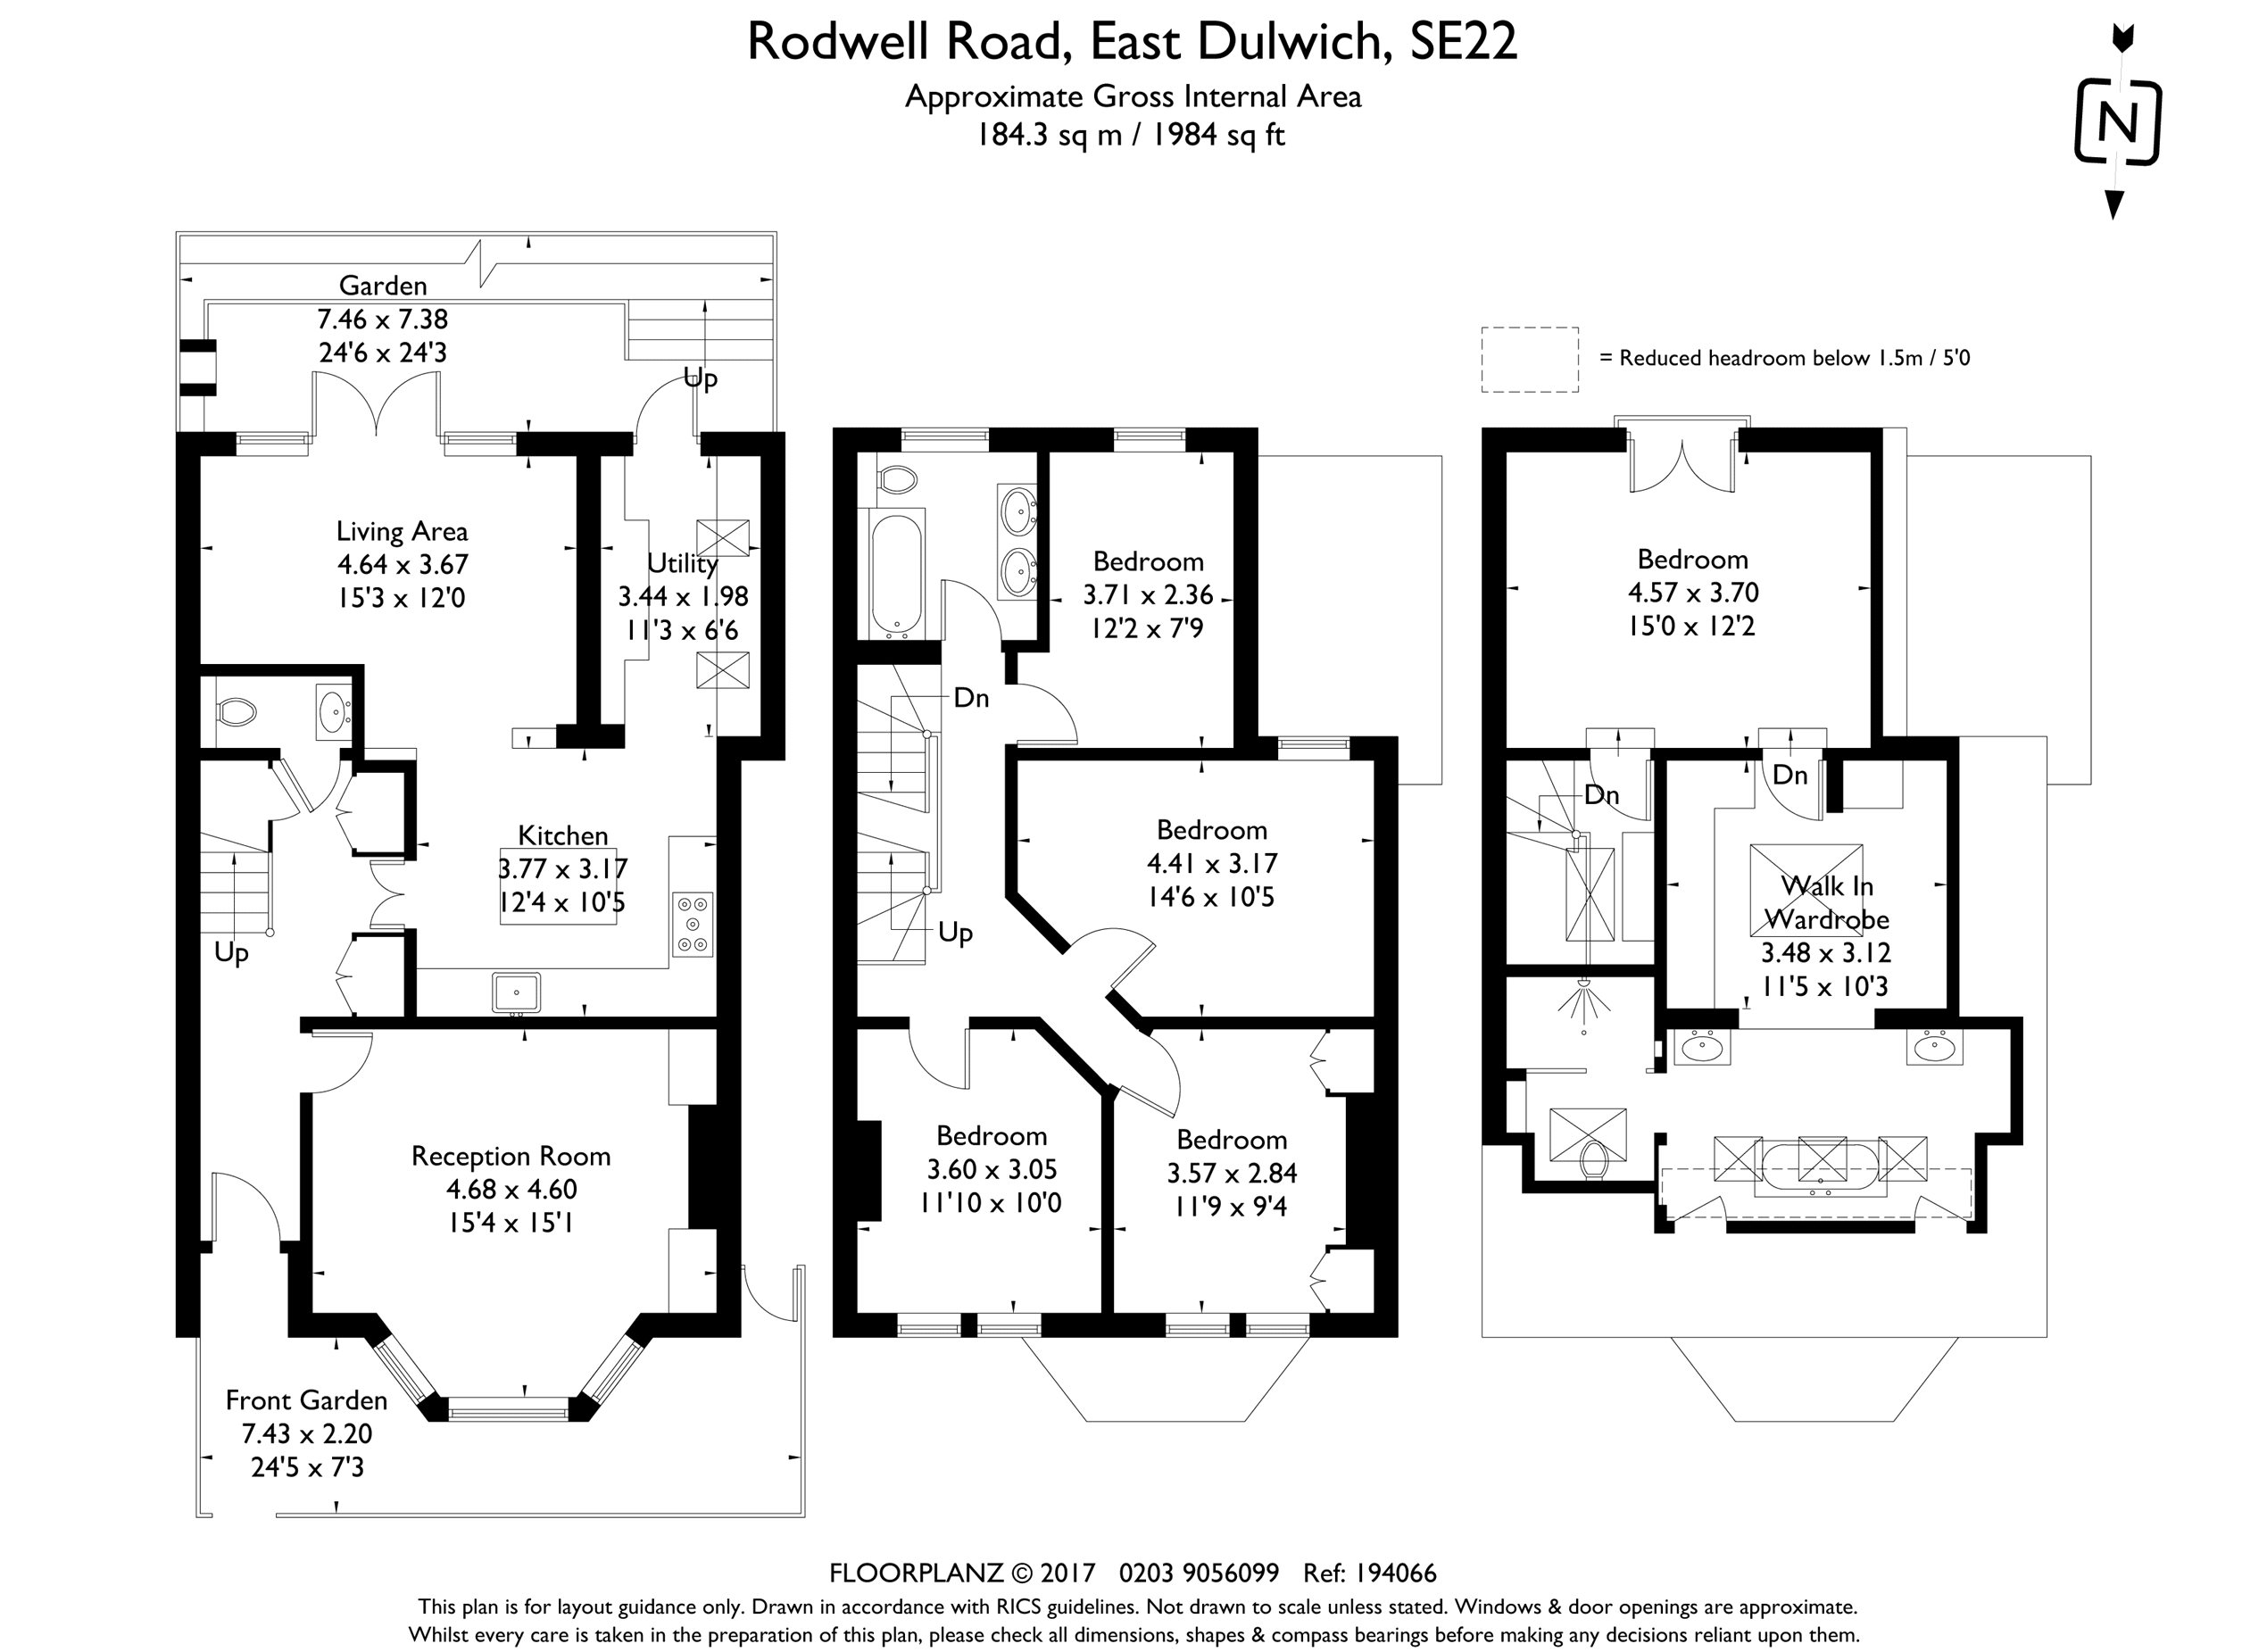 5 Bedrooms Semi-detached house to rent in Rodwell Road, East Dulwich, London SE22